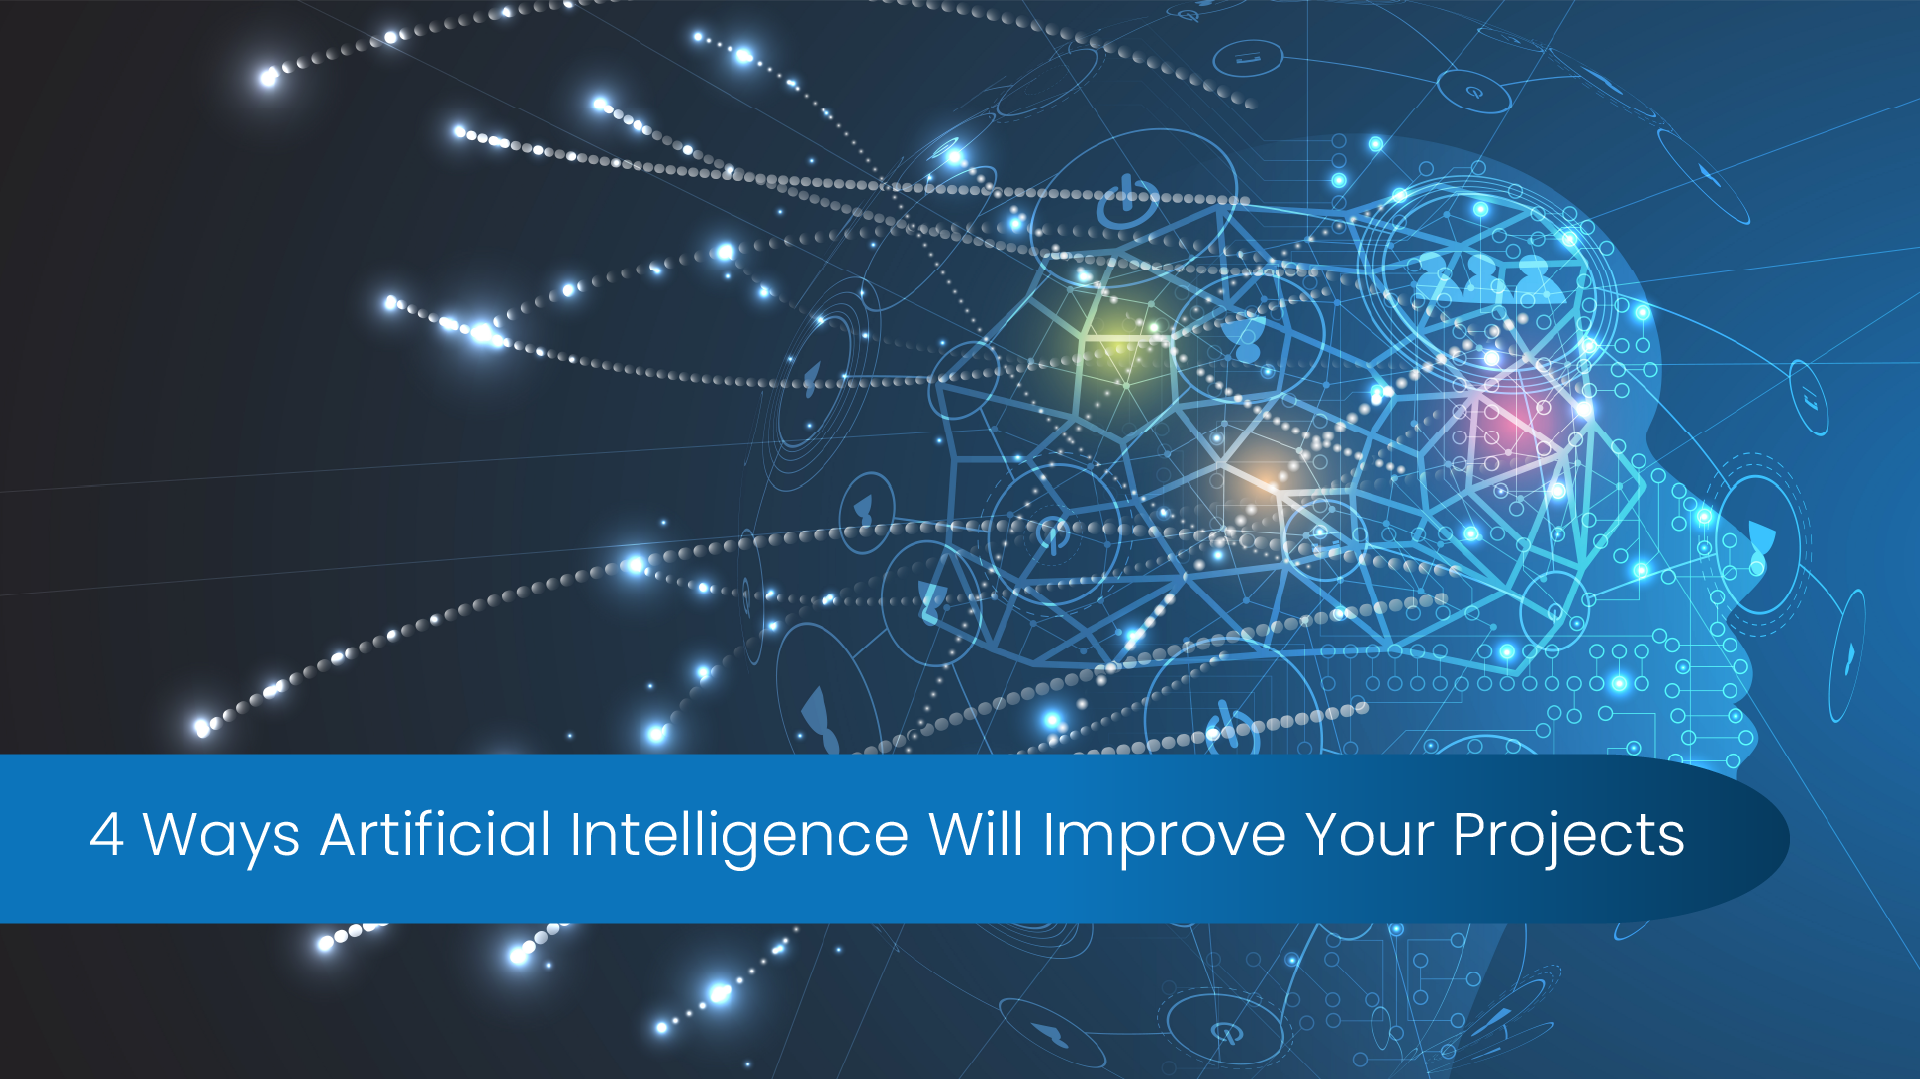 4 Ways Artificial Intelligence Will Improve Your Projects